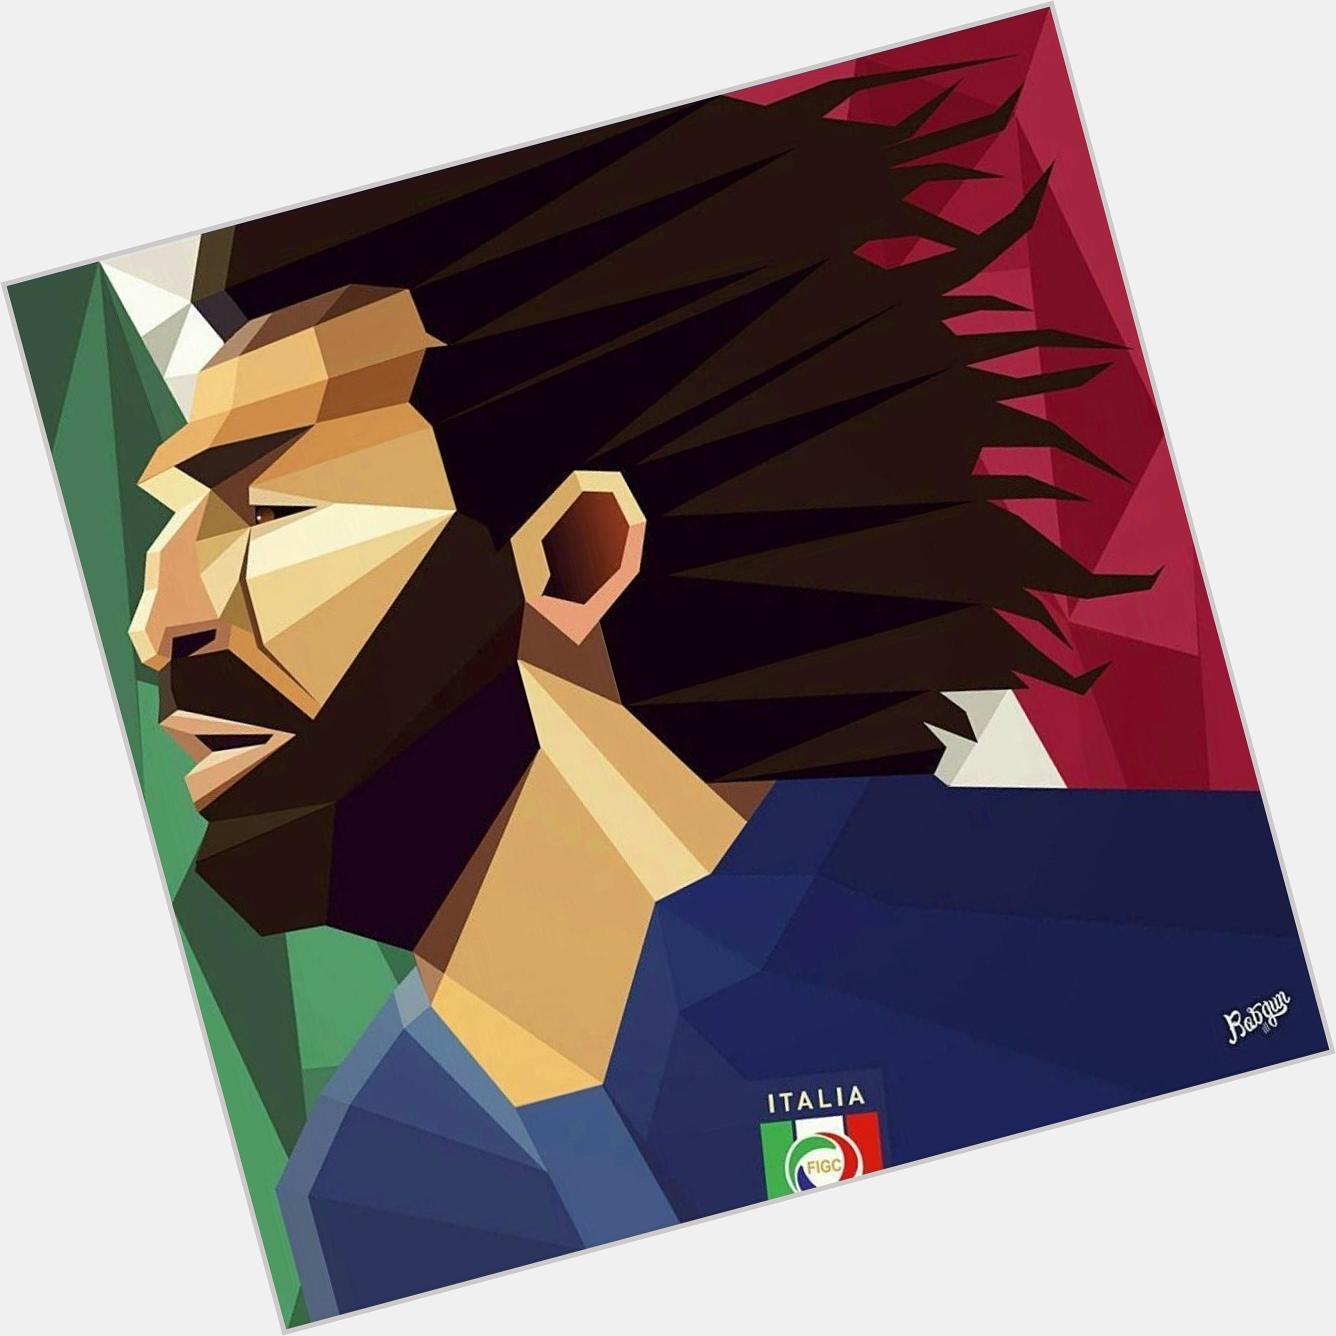 Happy birthday Andrea Pirlo. No Pirlo, no party. Give him a share and a like. 